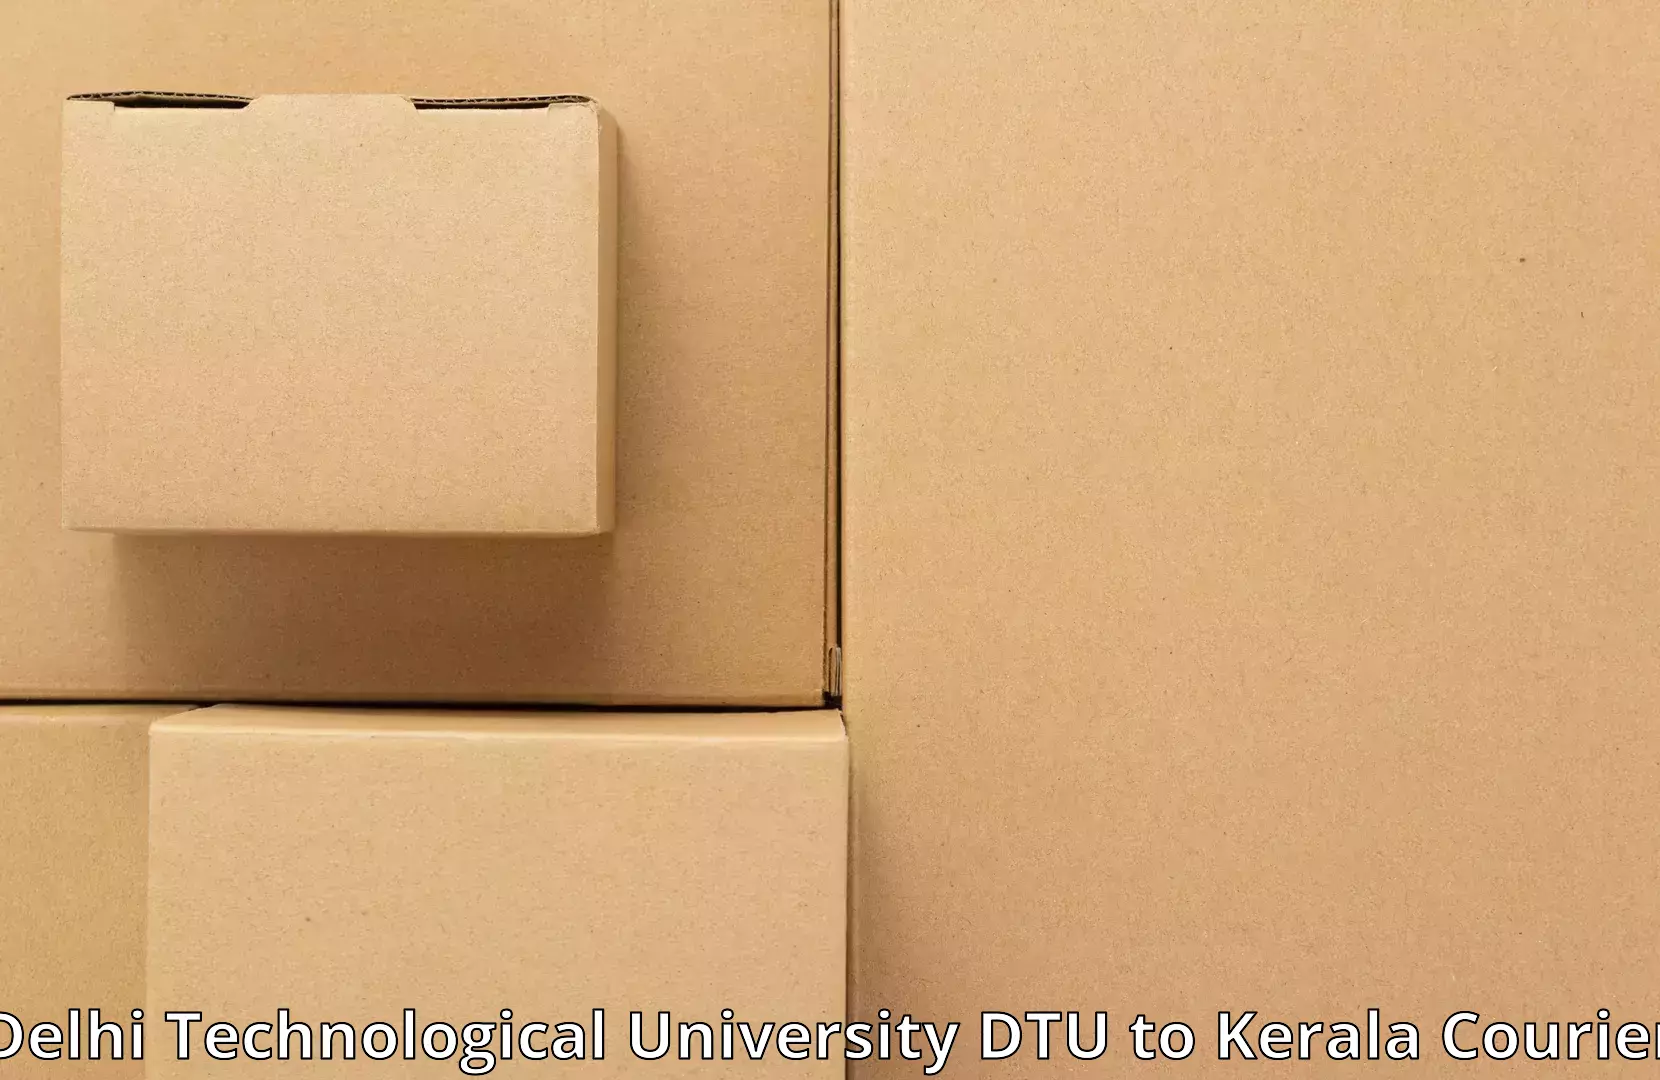 Tailored relocation services in Delhi Technological University DTU to Karunagappally